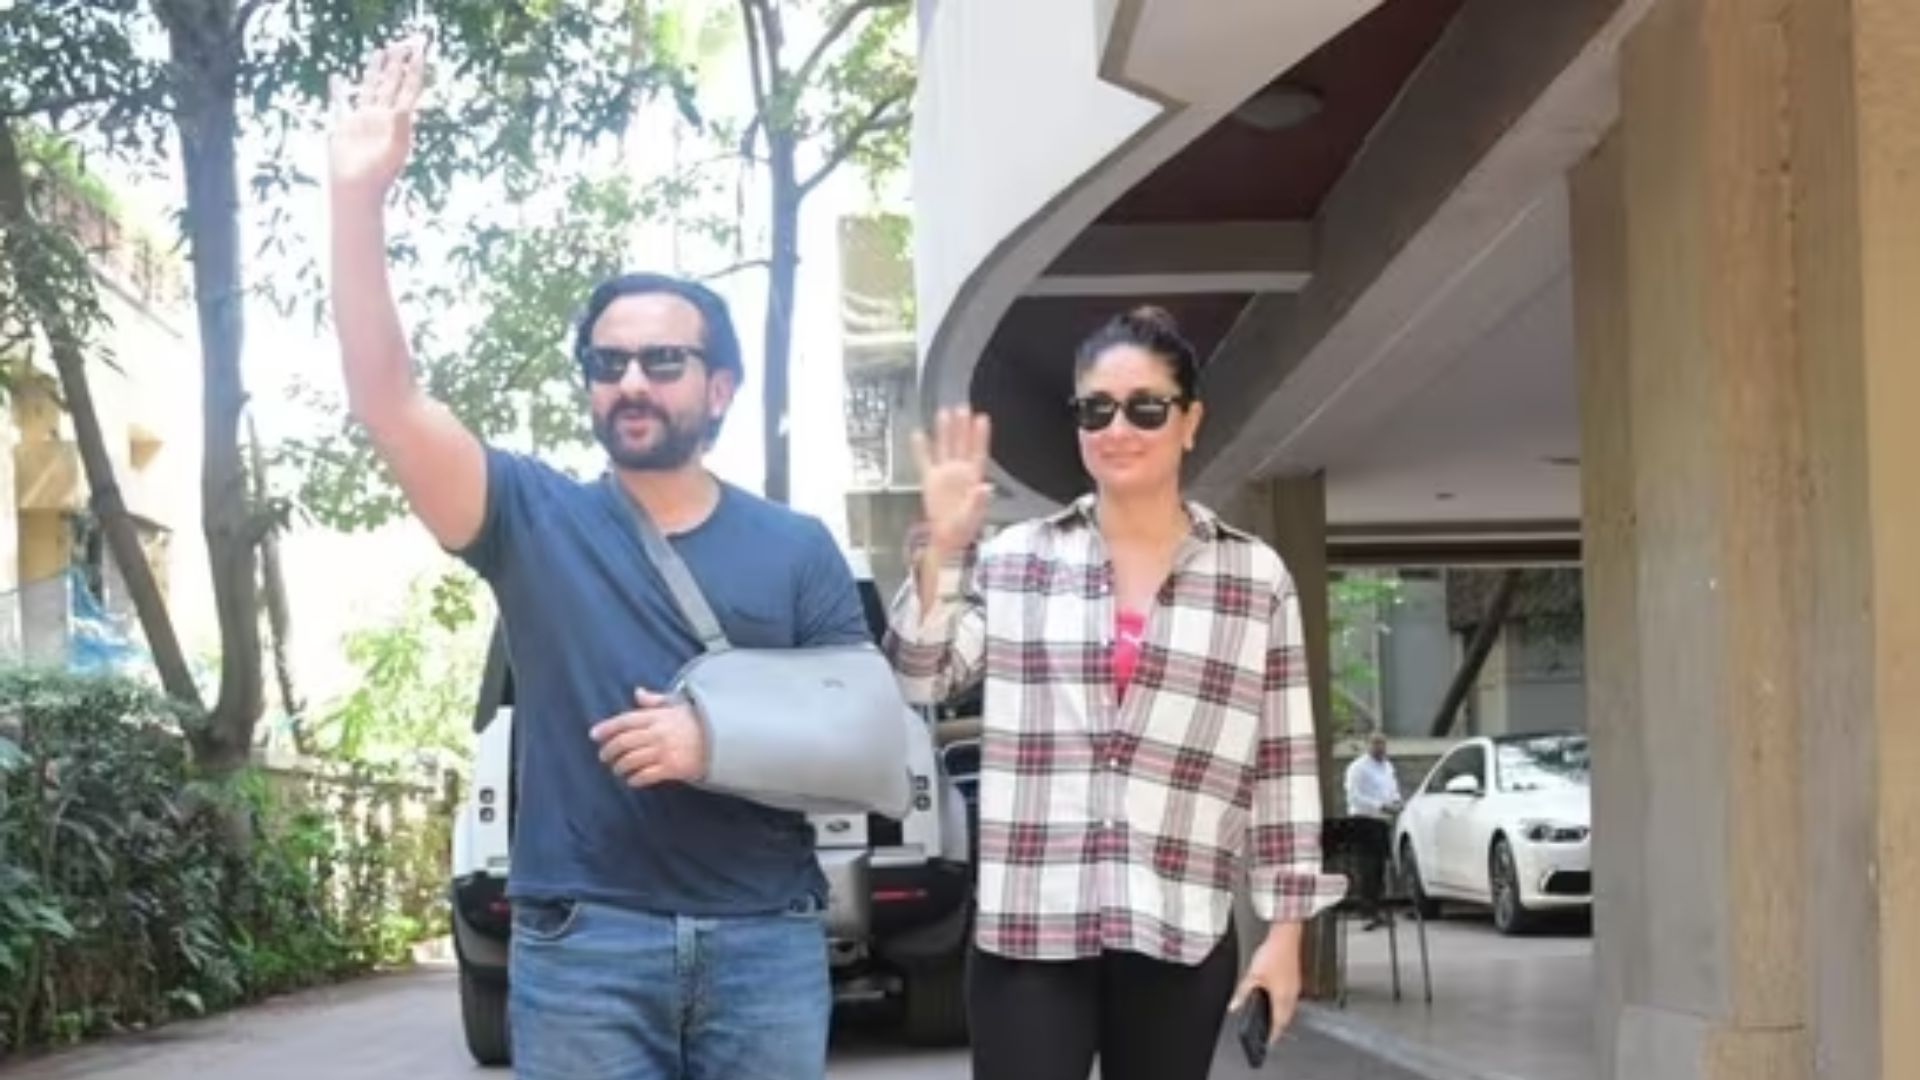 Saif Ali Khan released from hospital after surgery, returns home with wife Kareena